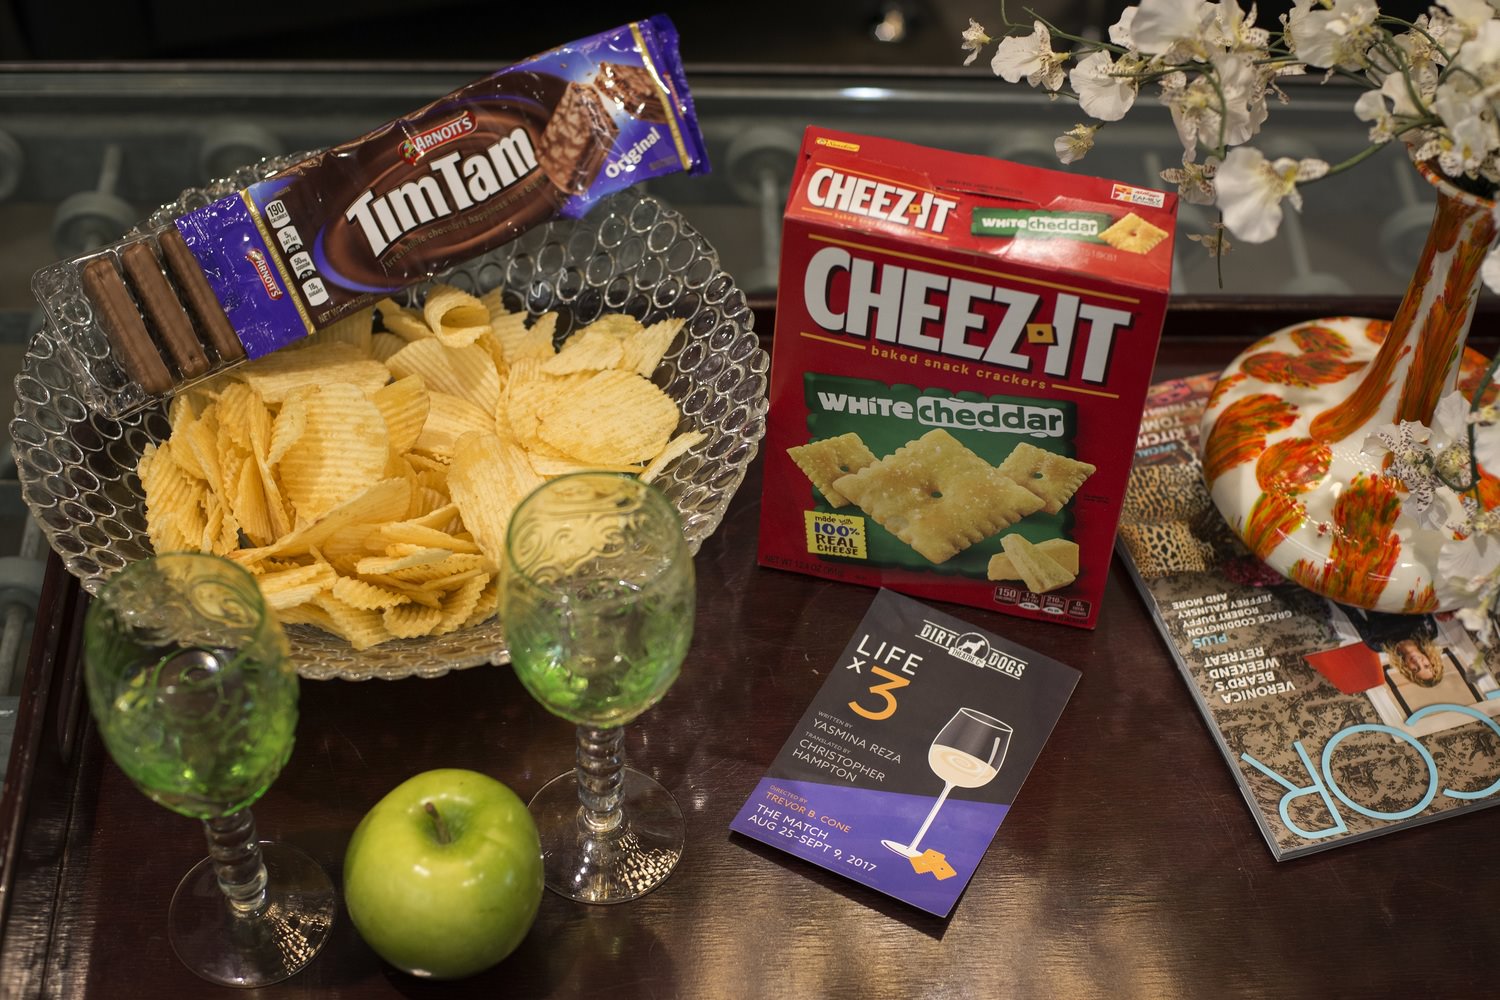 Do Sancerre and Cheez-Its make a good dinner party?
(Photo by Gary Griffin)